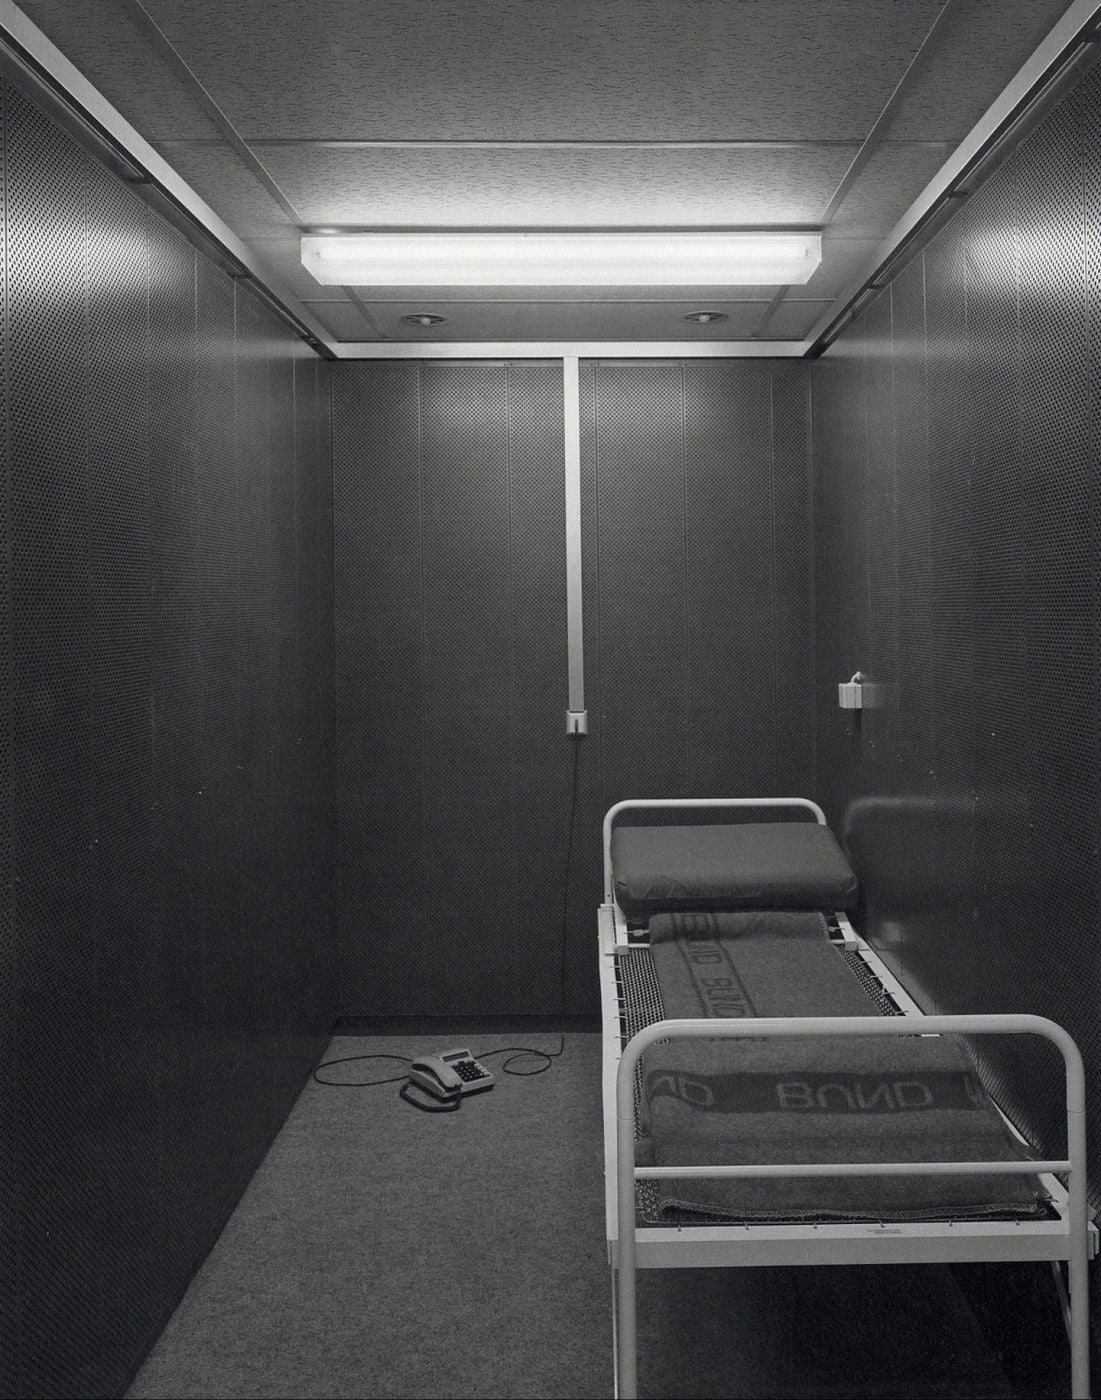 Andreas Magdanz: Dienststelle Marienthal (Marienthal Office/Bunker Photographs), Limited Edition ("M'Thal," with Ashtray from facility) - LACKING SMALL CARDBOARD BOX FOR ASHTRAY